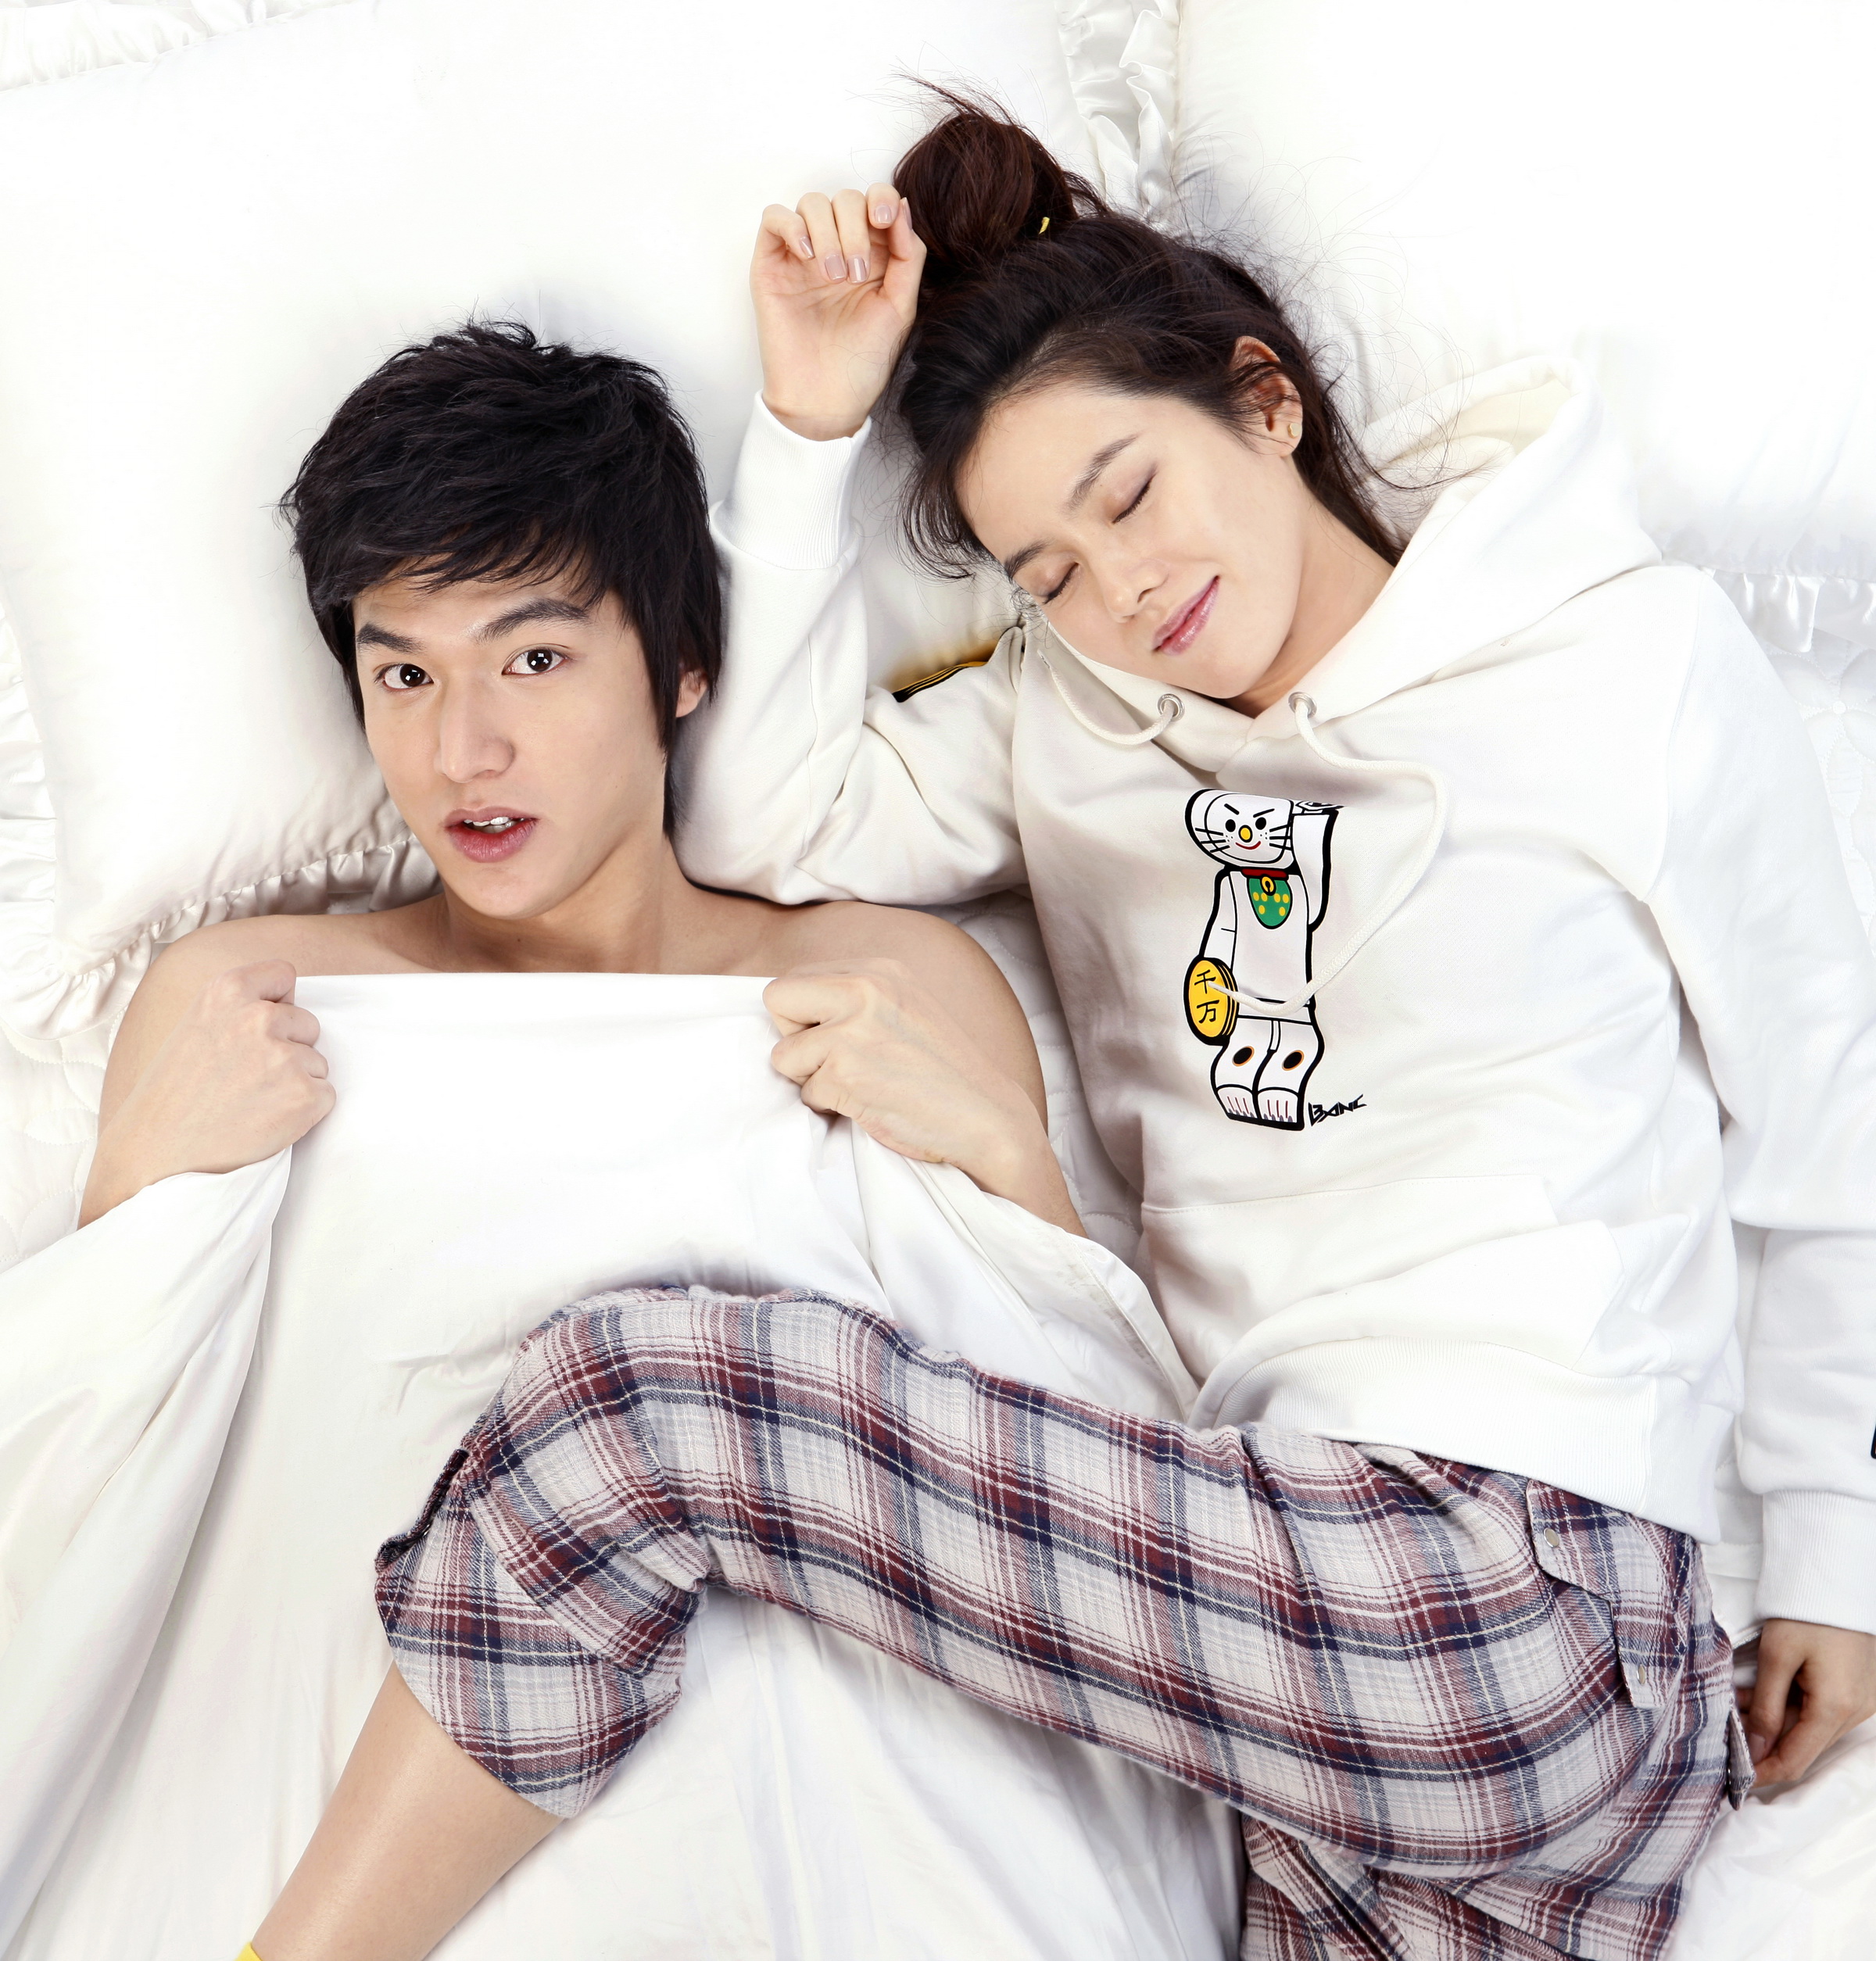 Scene from 2010 MBC-TV sitcom “Personal Taste”, starring Son Ye-jin, right, and Lee Min-ho. (Newsis)